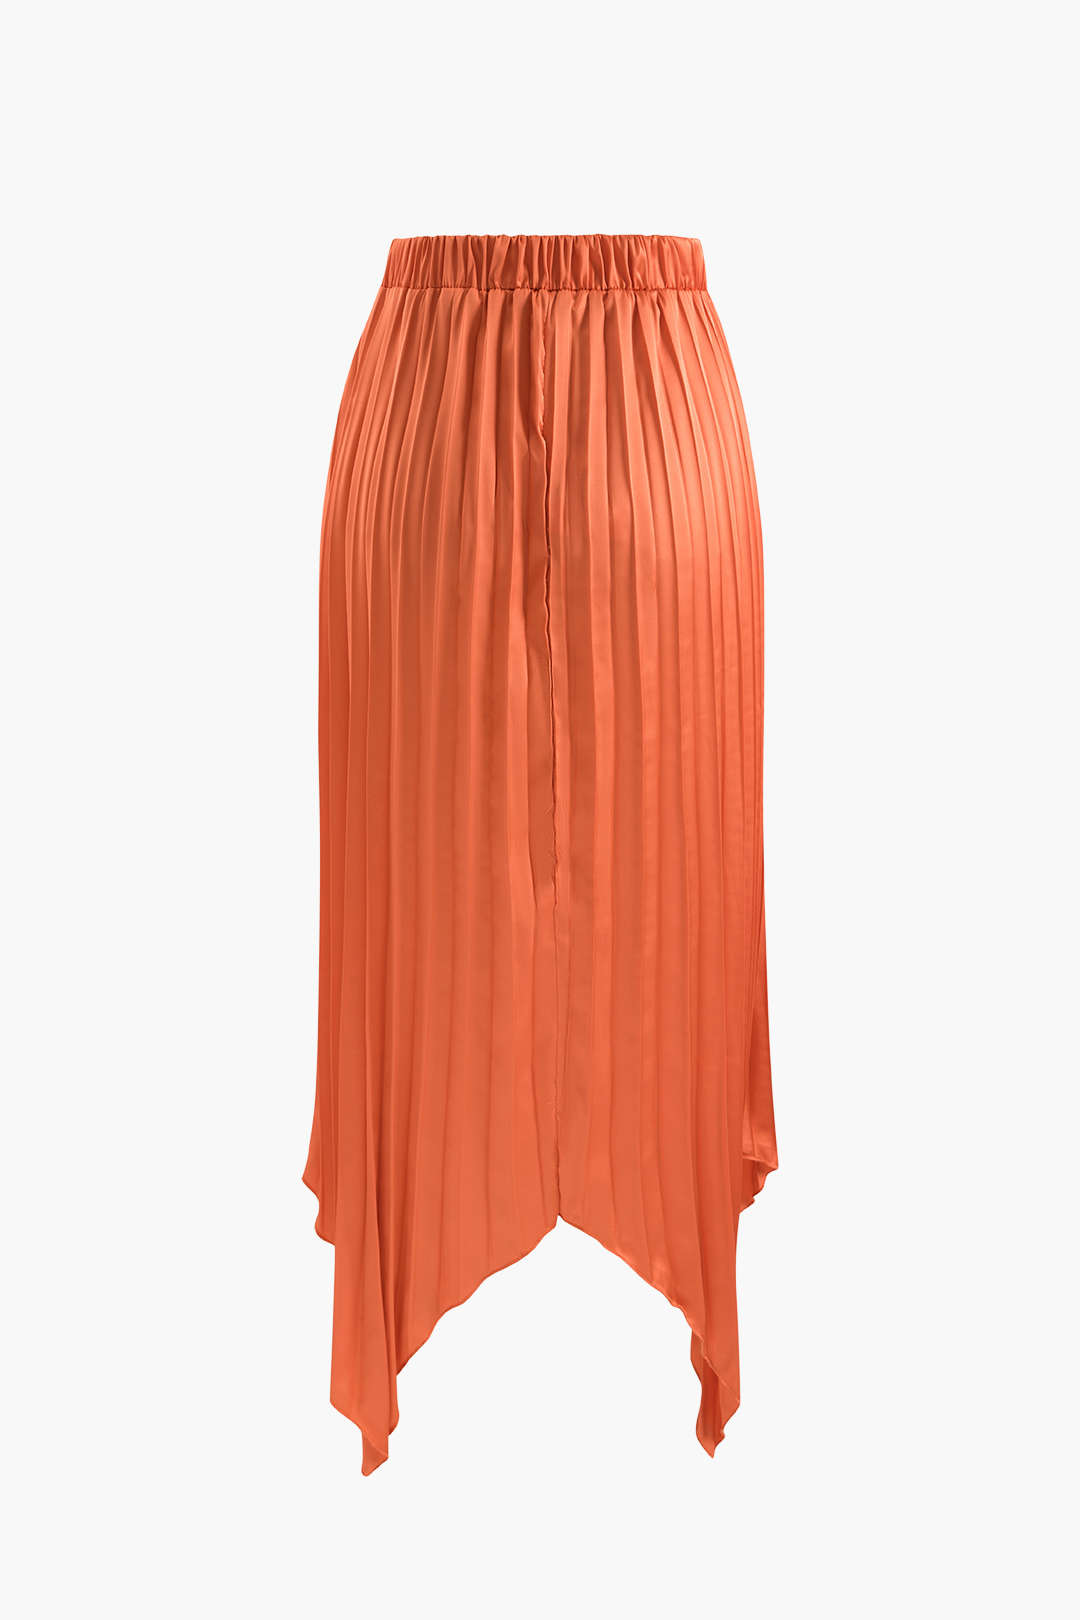 Knot Front Tube Top And Asymmetric Pleated Skirt Set